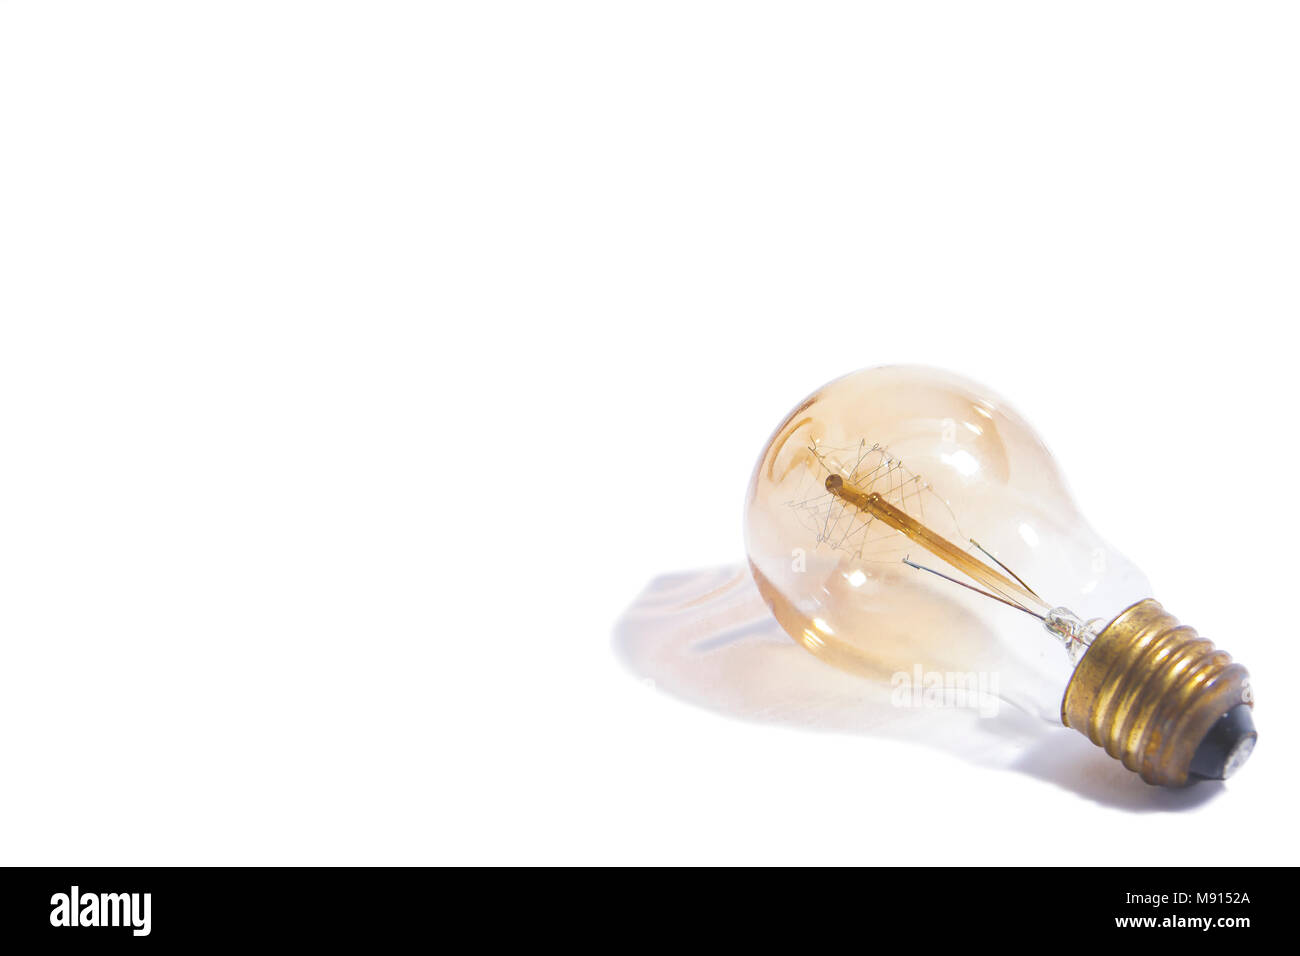 Blurred of vintage light blub on the white background. Stock Photo